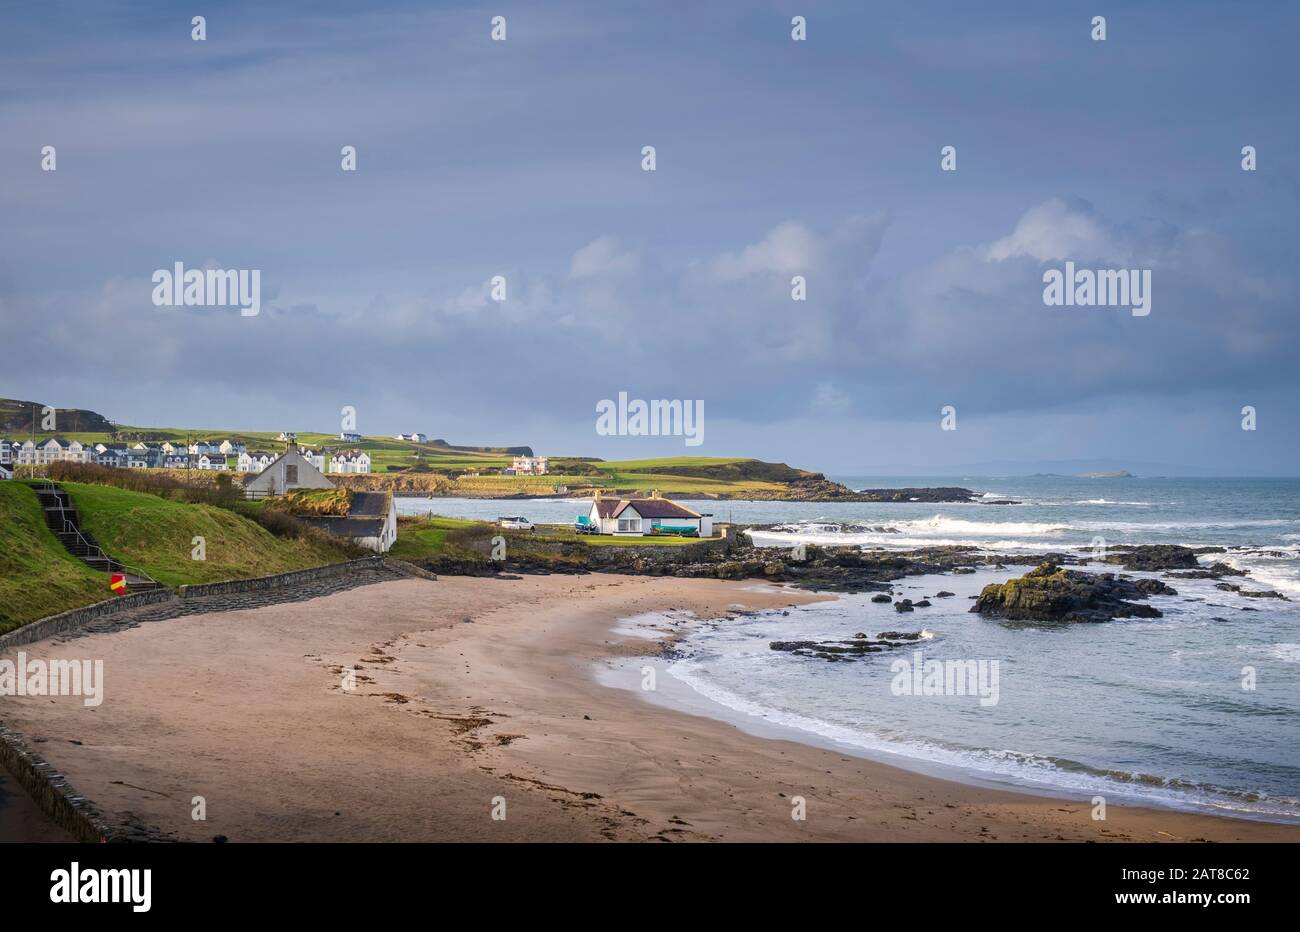 A beach, one of three beaches at Portballintrae  a small seaside village in County Antrim, Northern Ireland Stock Photo